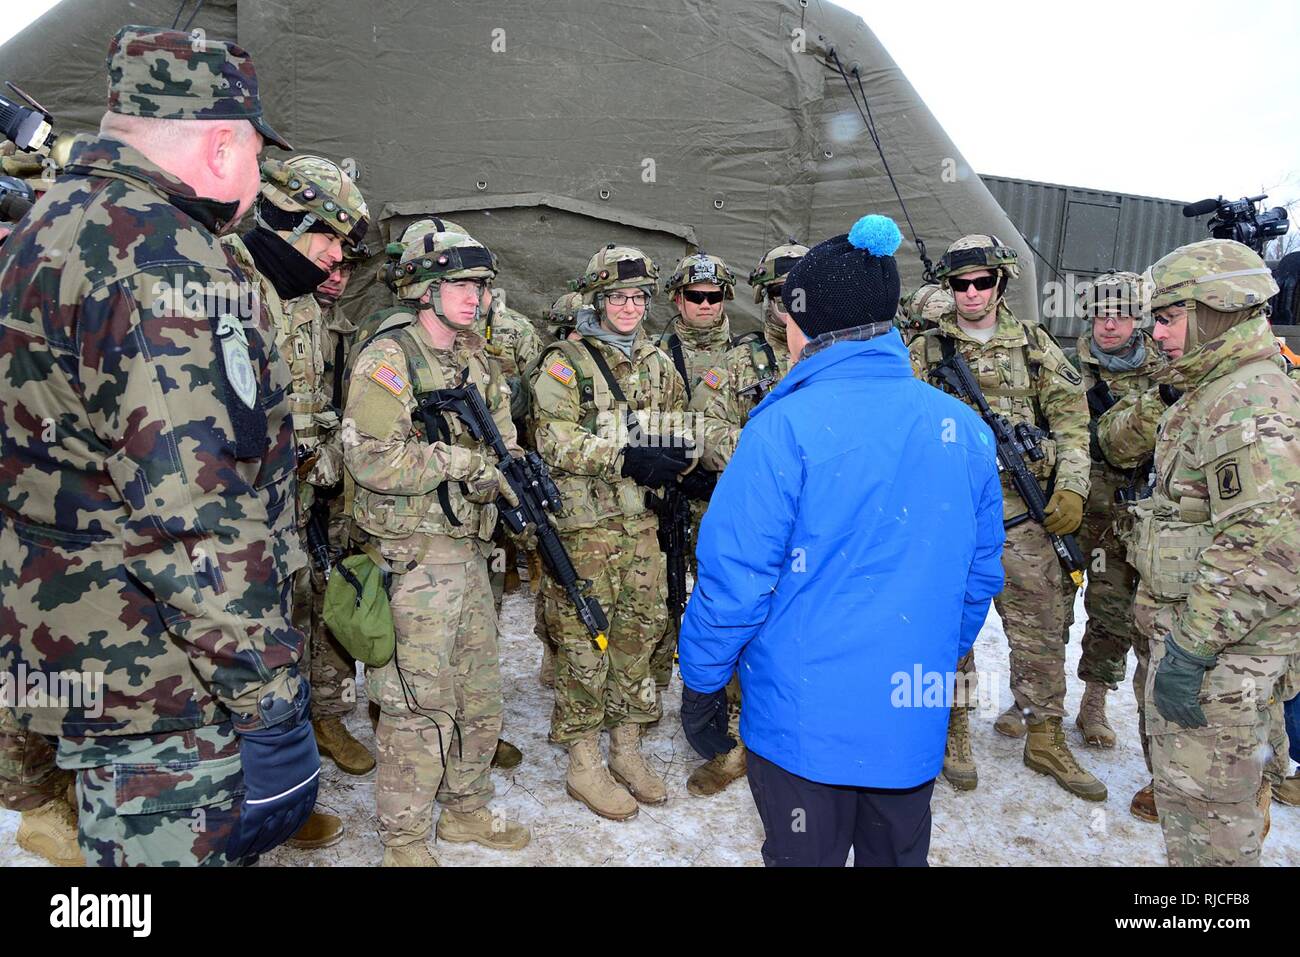 In the middle, Robert Hartley, U.S. Ambassador to Slovenia, talks with U.S. Army paratroopers from the 173rd Brigade Support Battalion, 173rd Airborne Brigade, as part of a visit during exercise Lipizzaner III at Pocek Range in Slovenia Jan. 26, 2017. Lipizzaner is a combined squad-level training exercise in preparation for platoon evaluation, and to validate battalion-level deployment procedures. ( Stock Photo